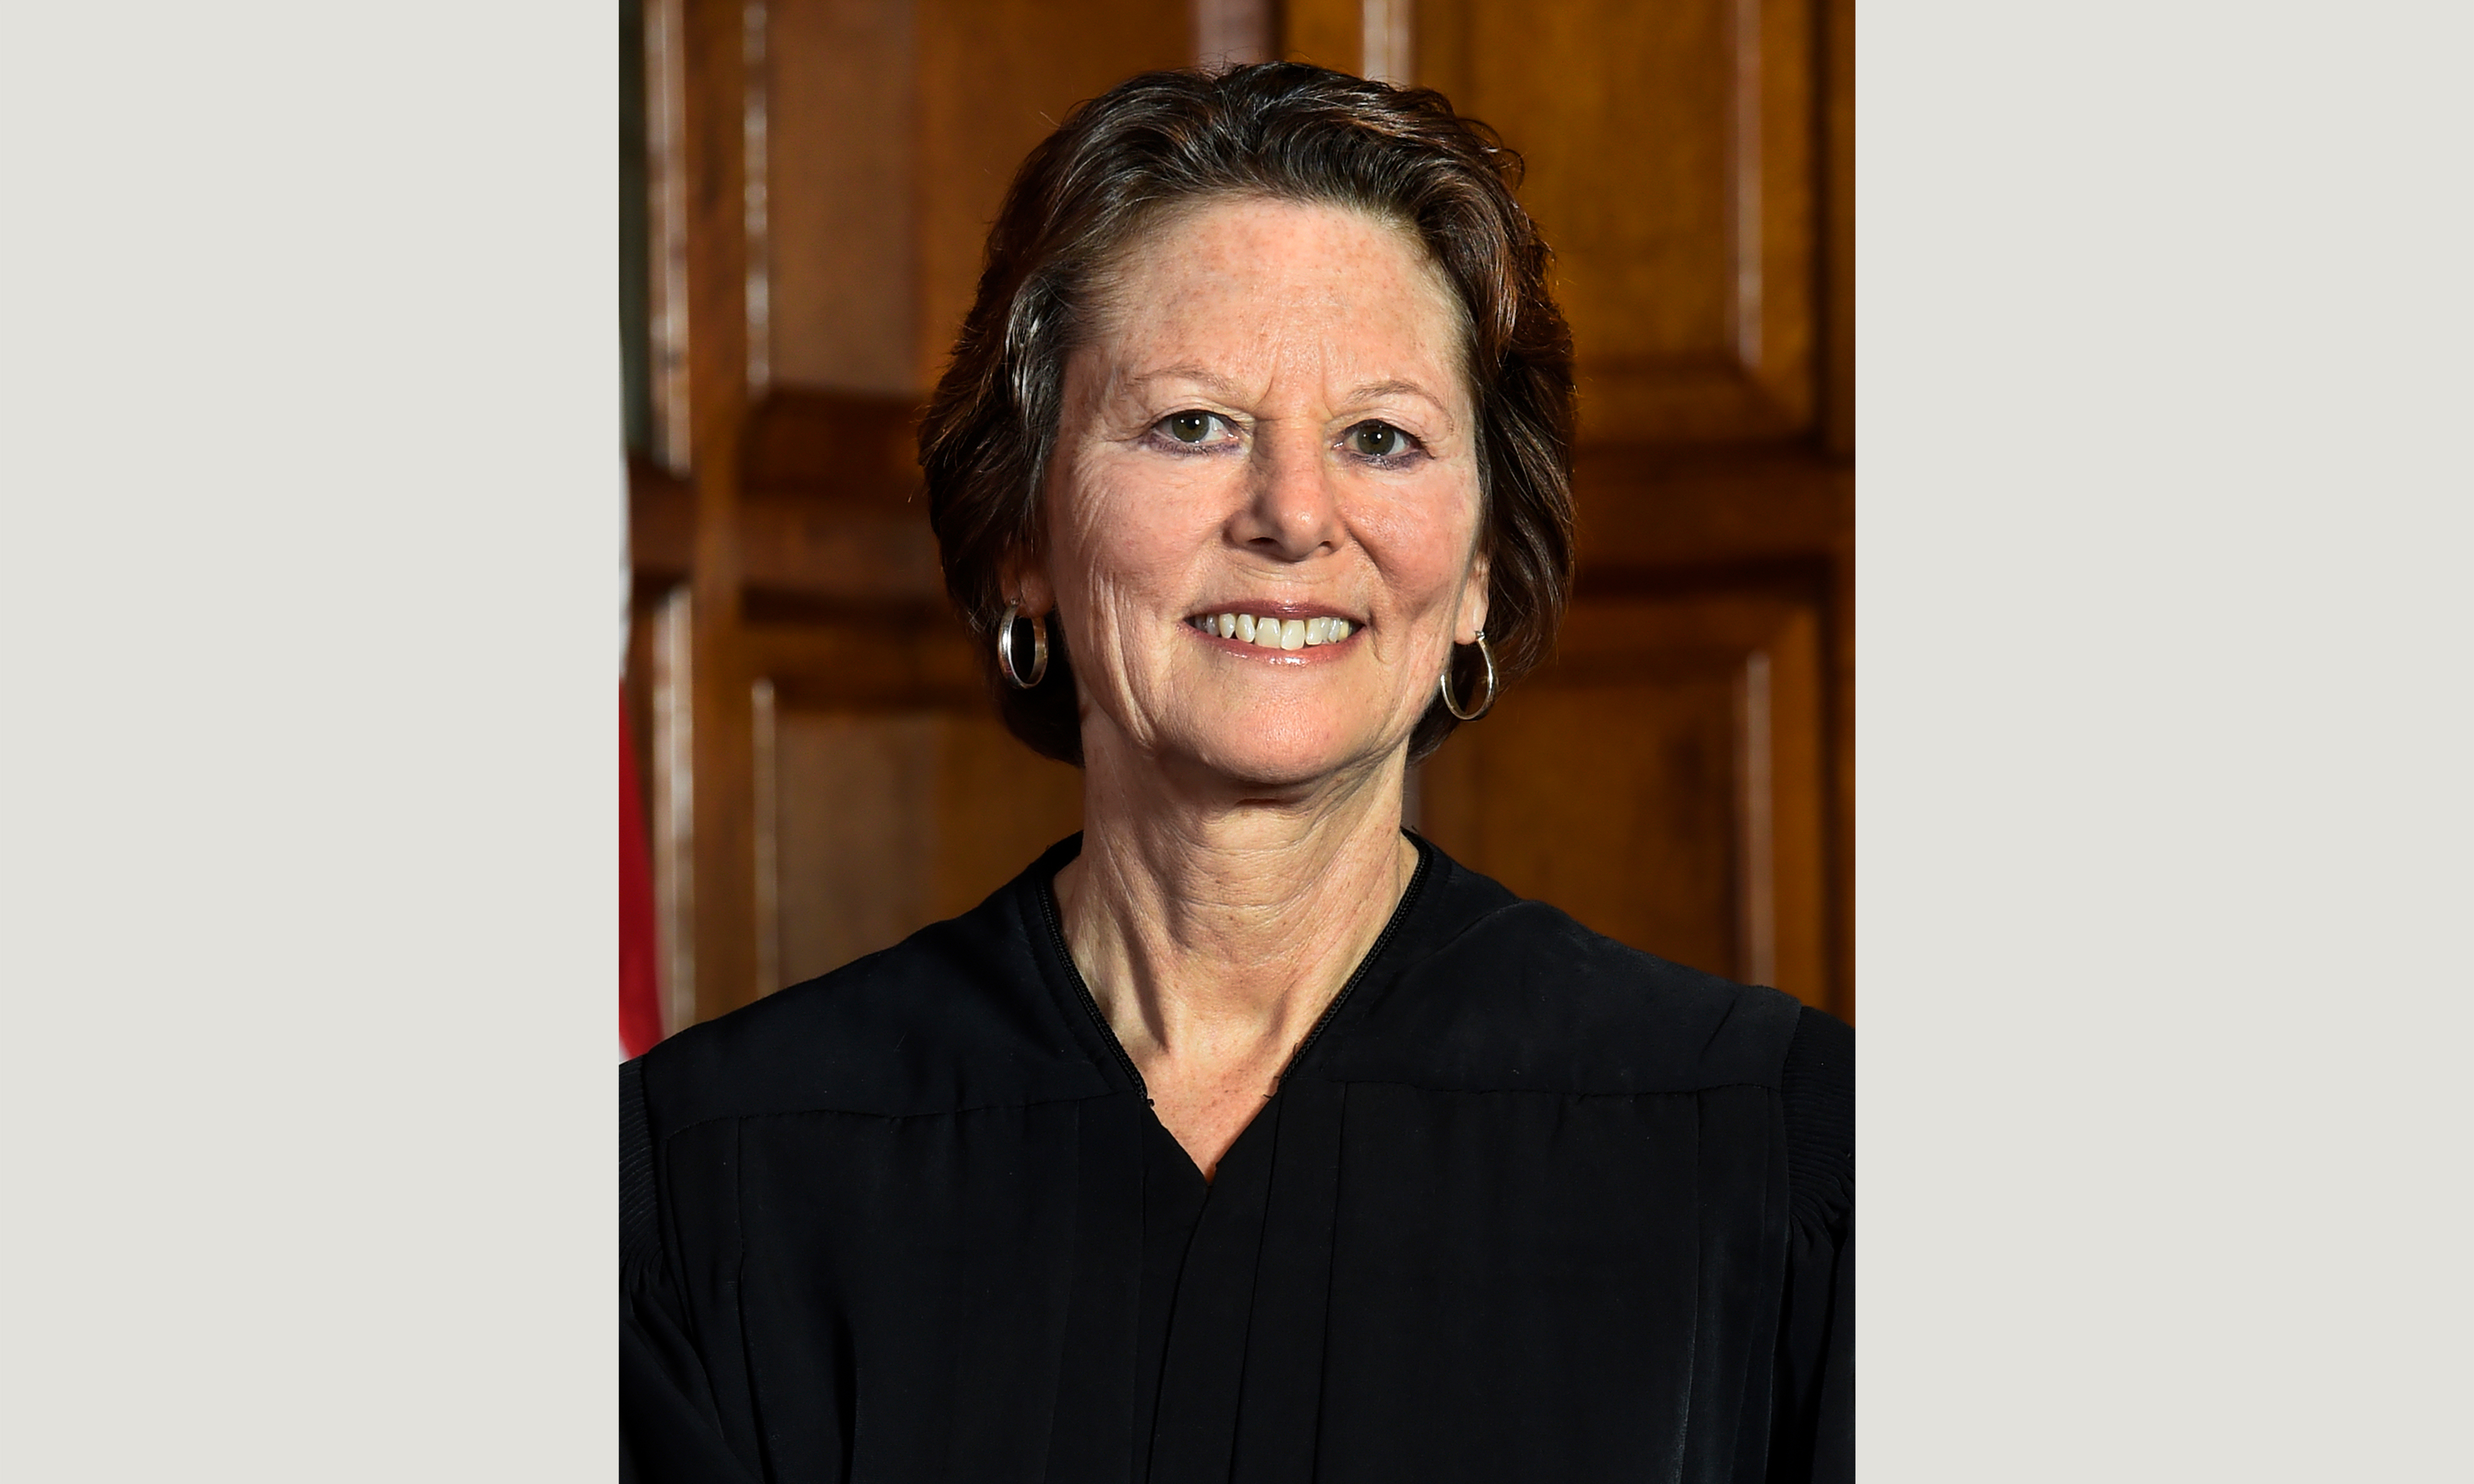 Judge Leslie Stein States Plan to Retire From New York's Top Court in 2021